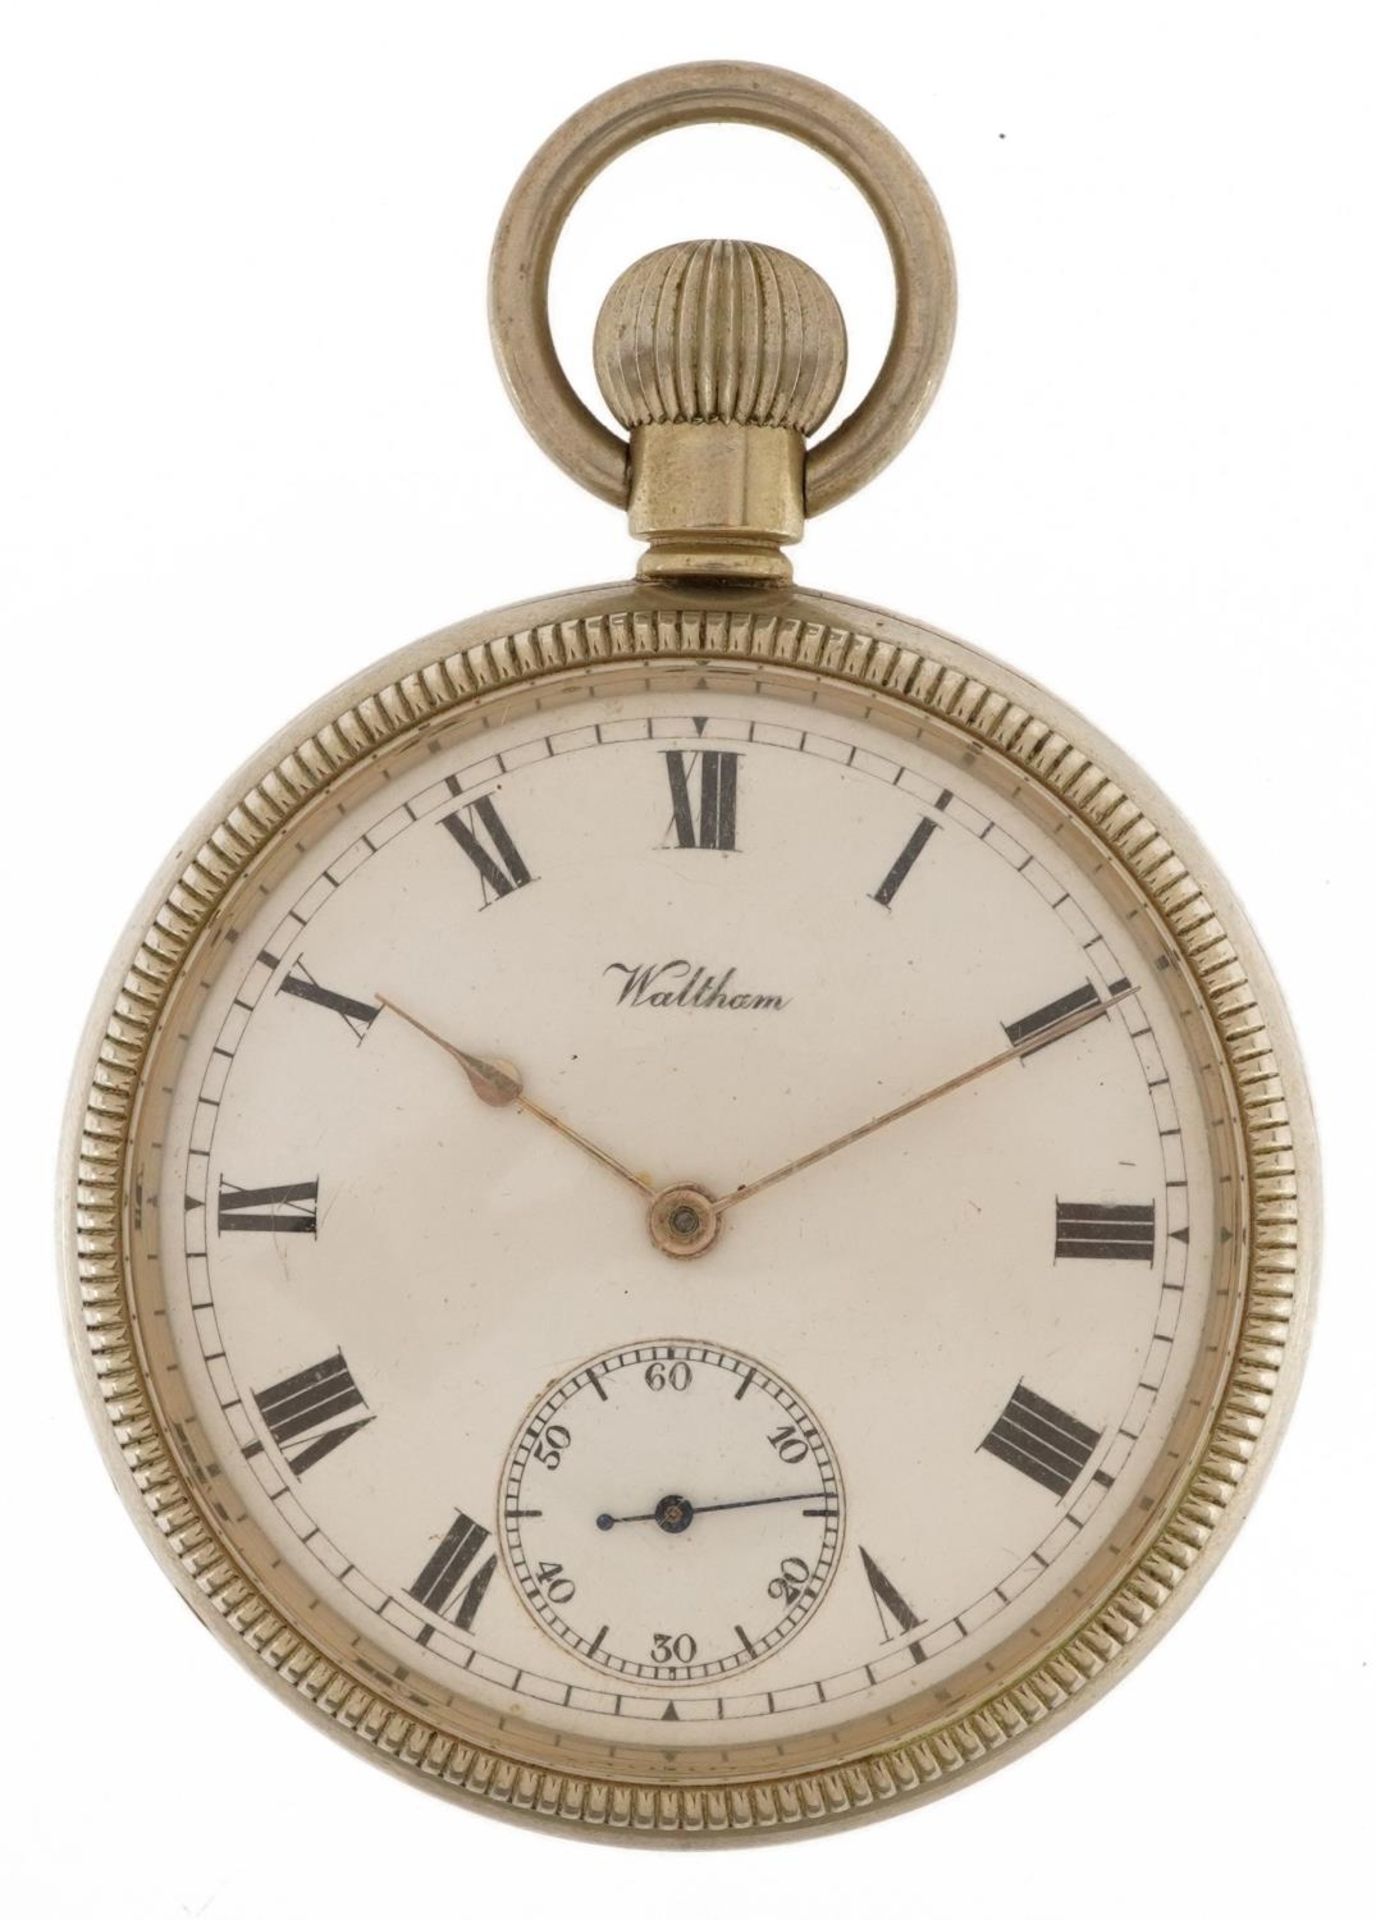 Waltham, British military issue gentlemen's open face pocket watch, the case engraved H.S.3, 50.